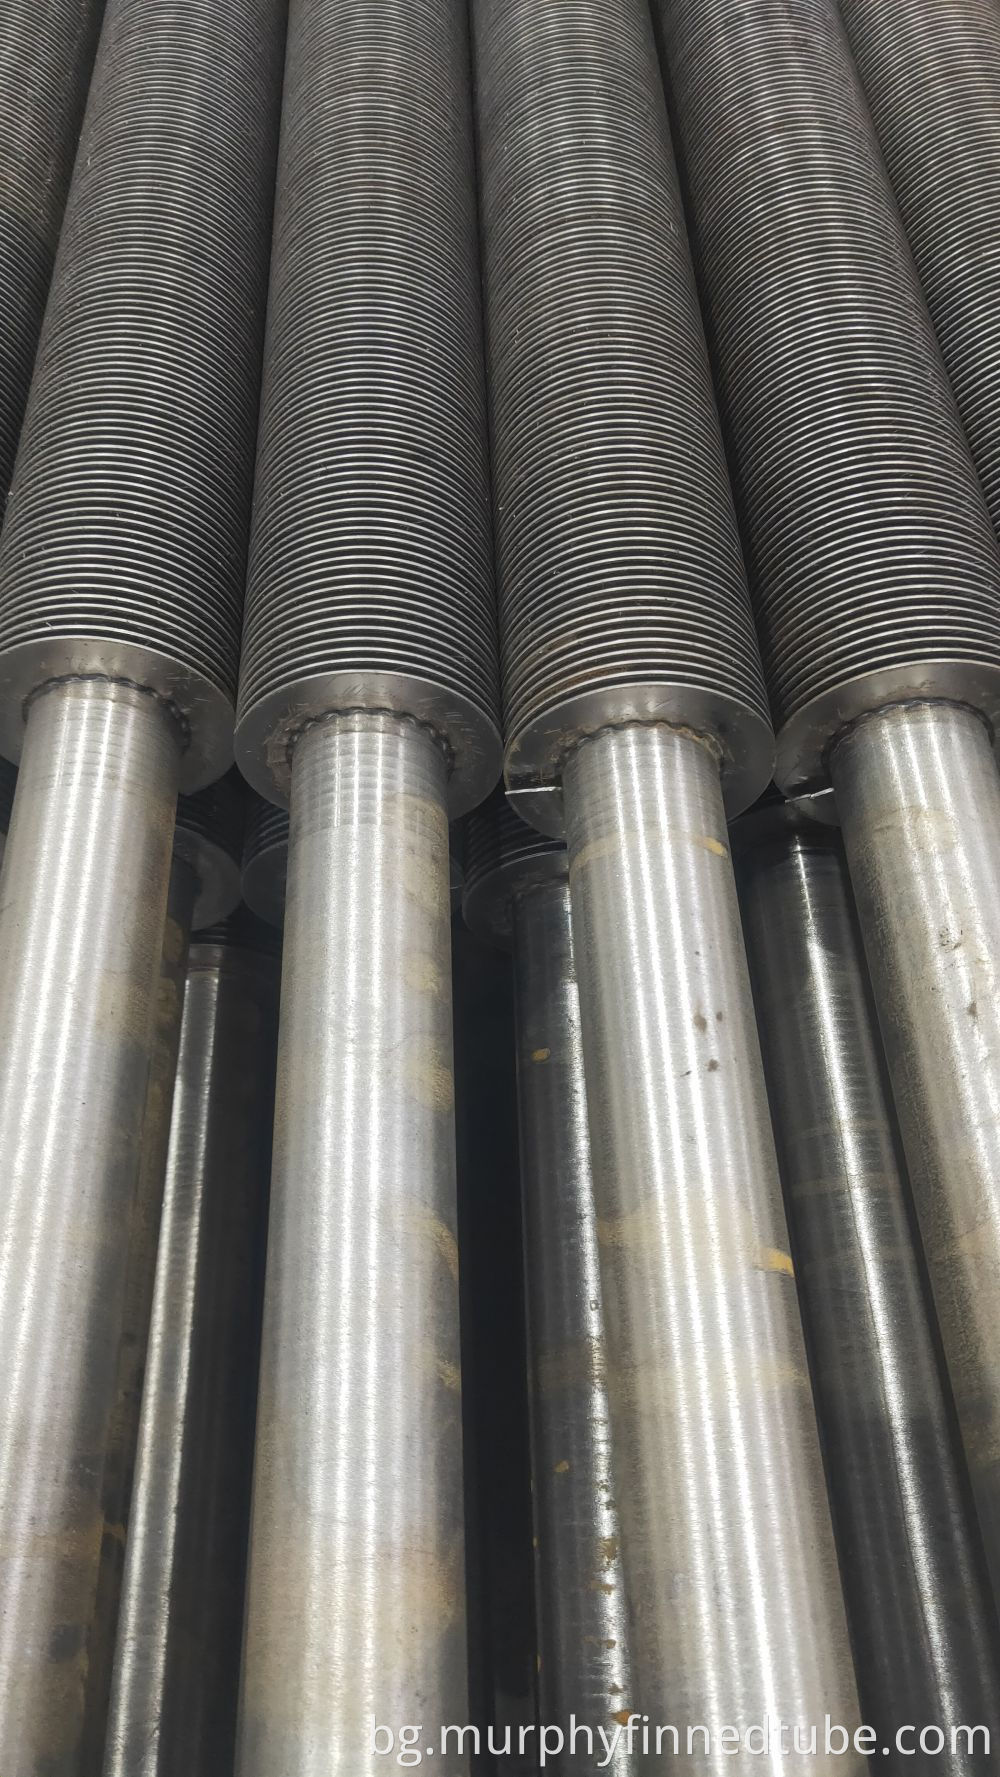 Spiral Welded Pipes